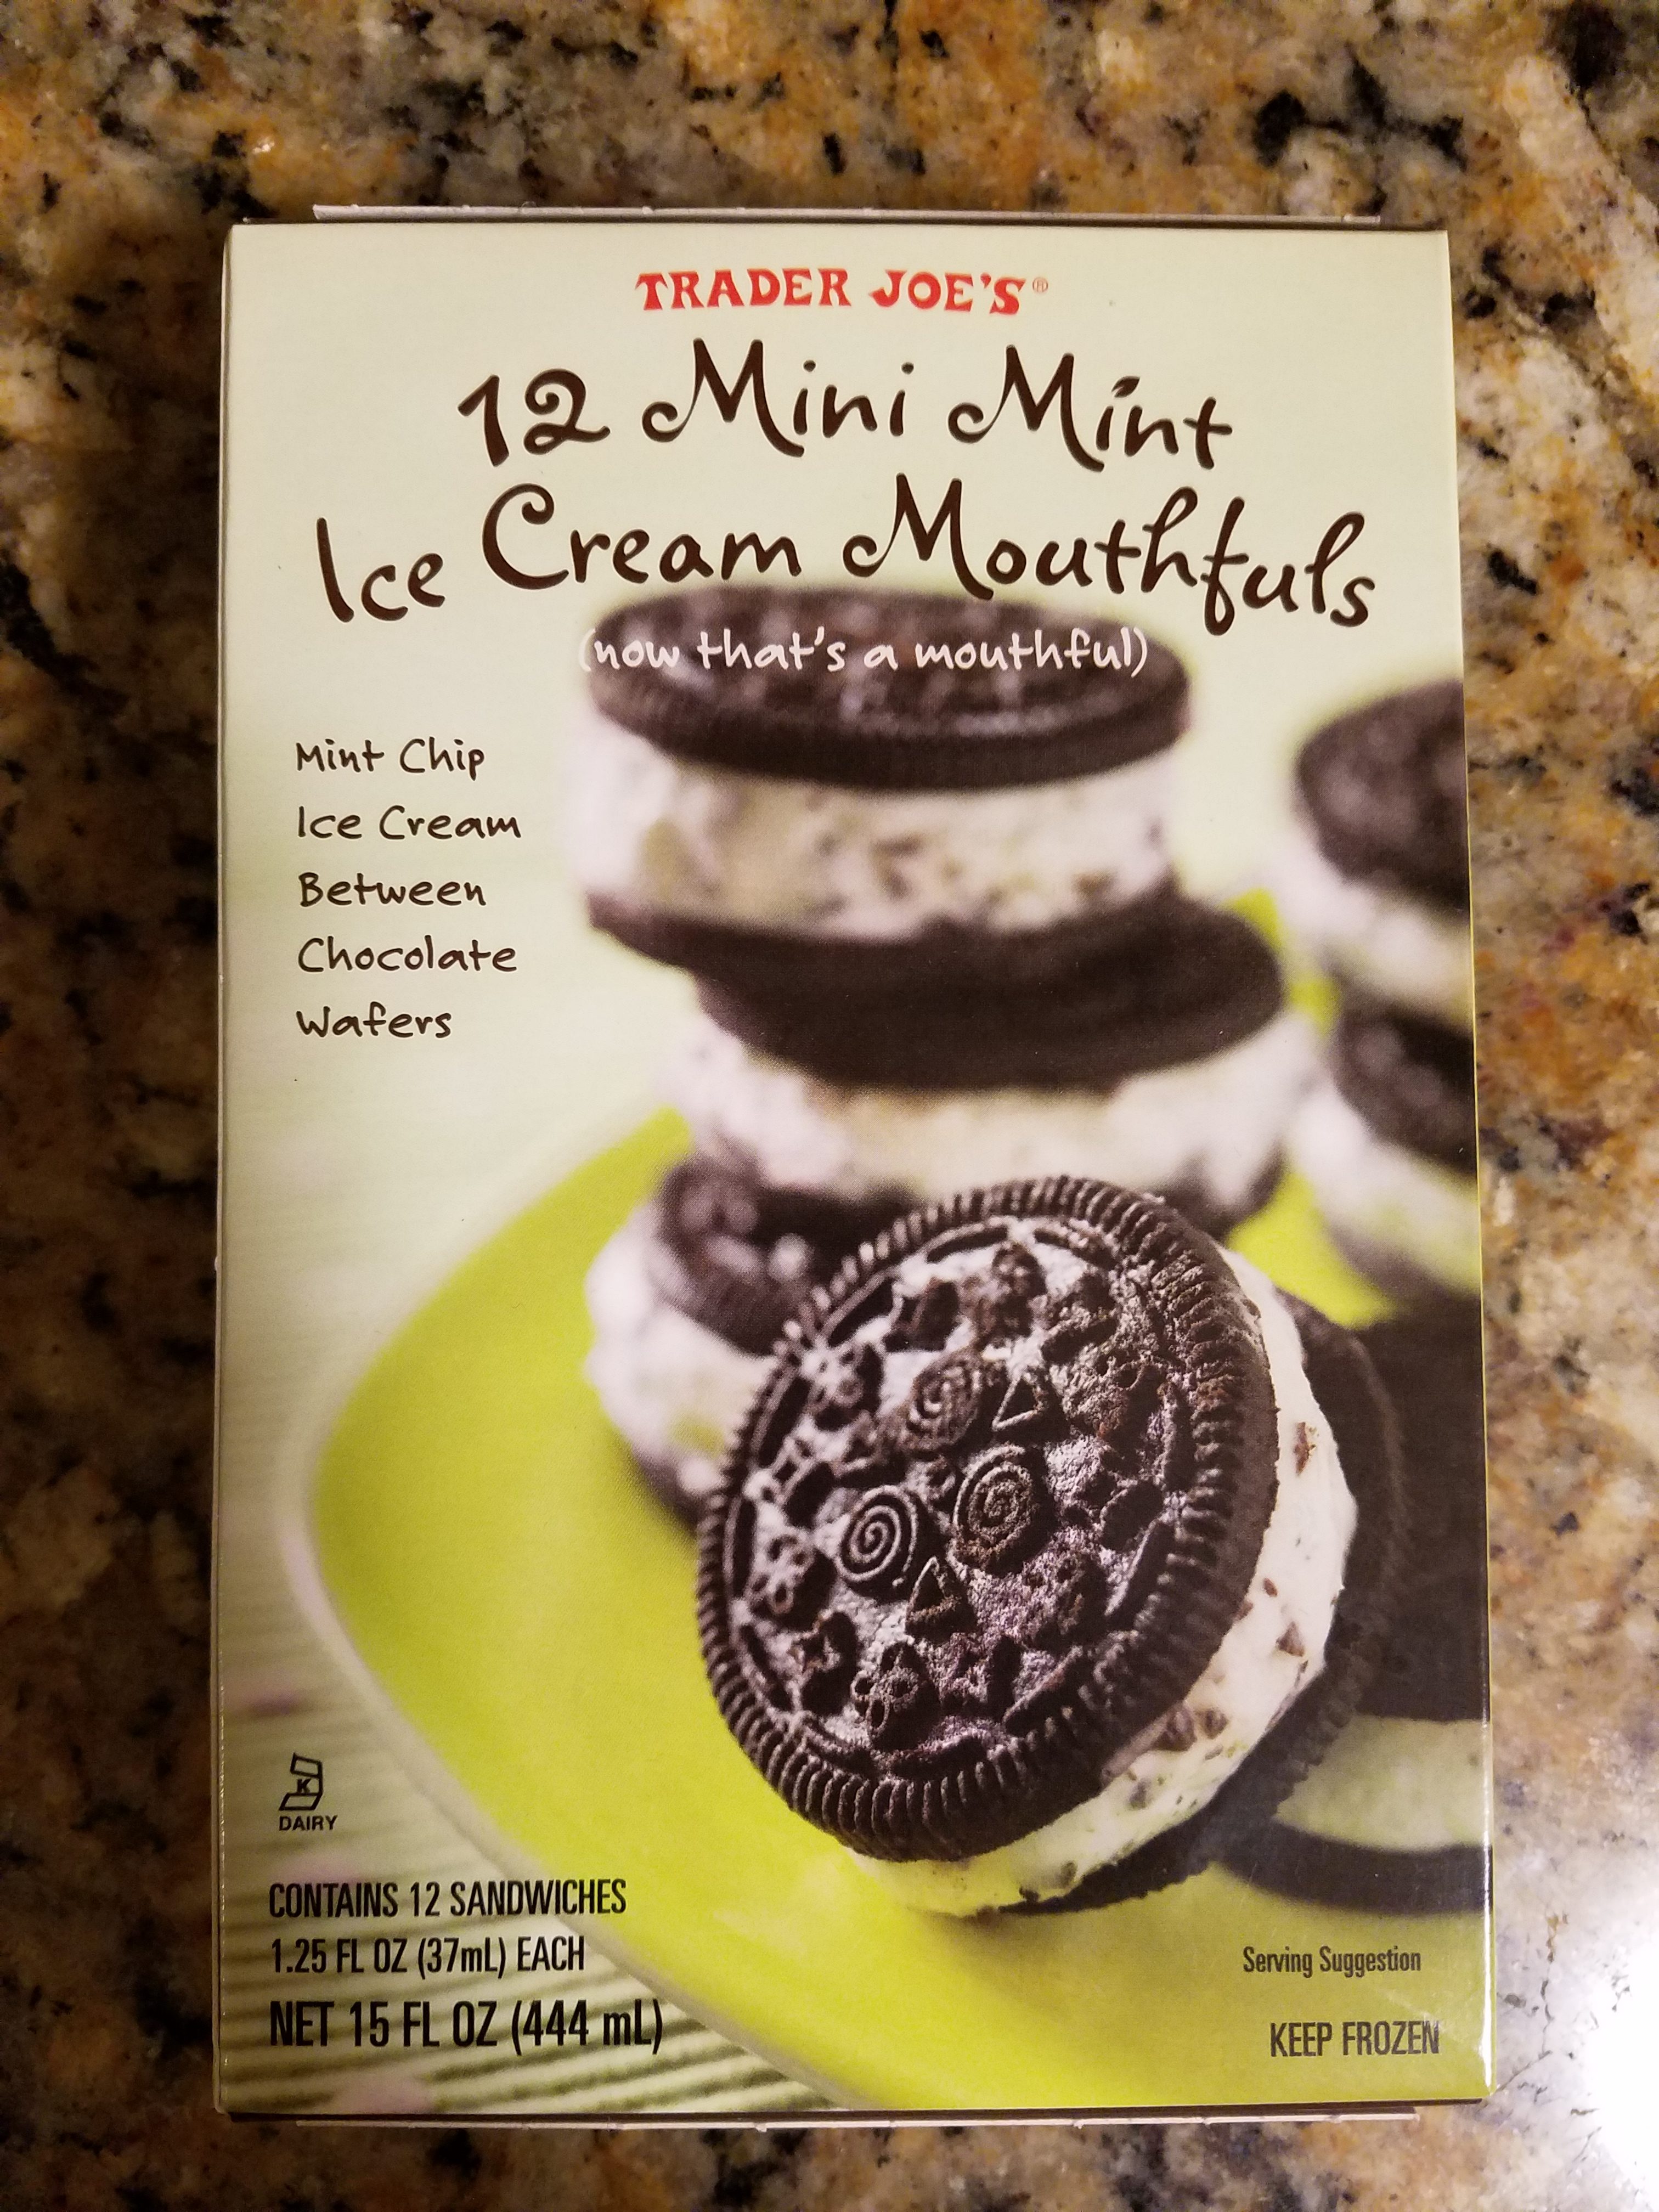 Ice Cream | Trader Joe's Mini Mint Ice Cream Mouthfuls Review | Review